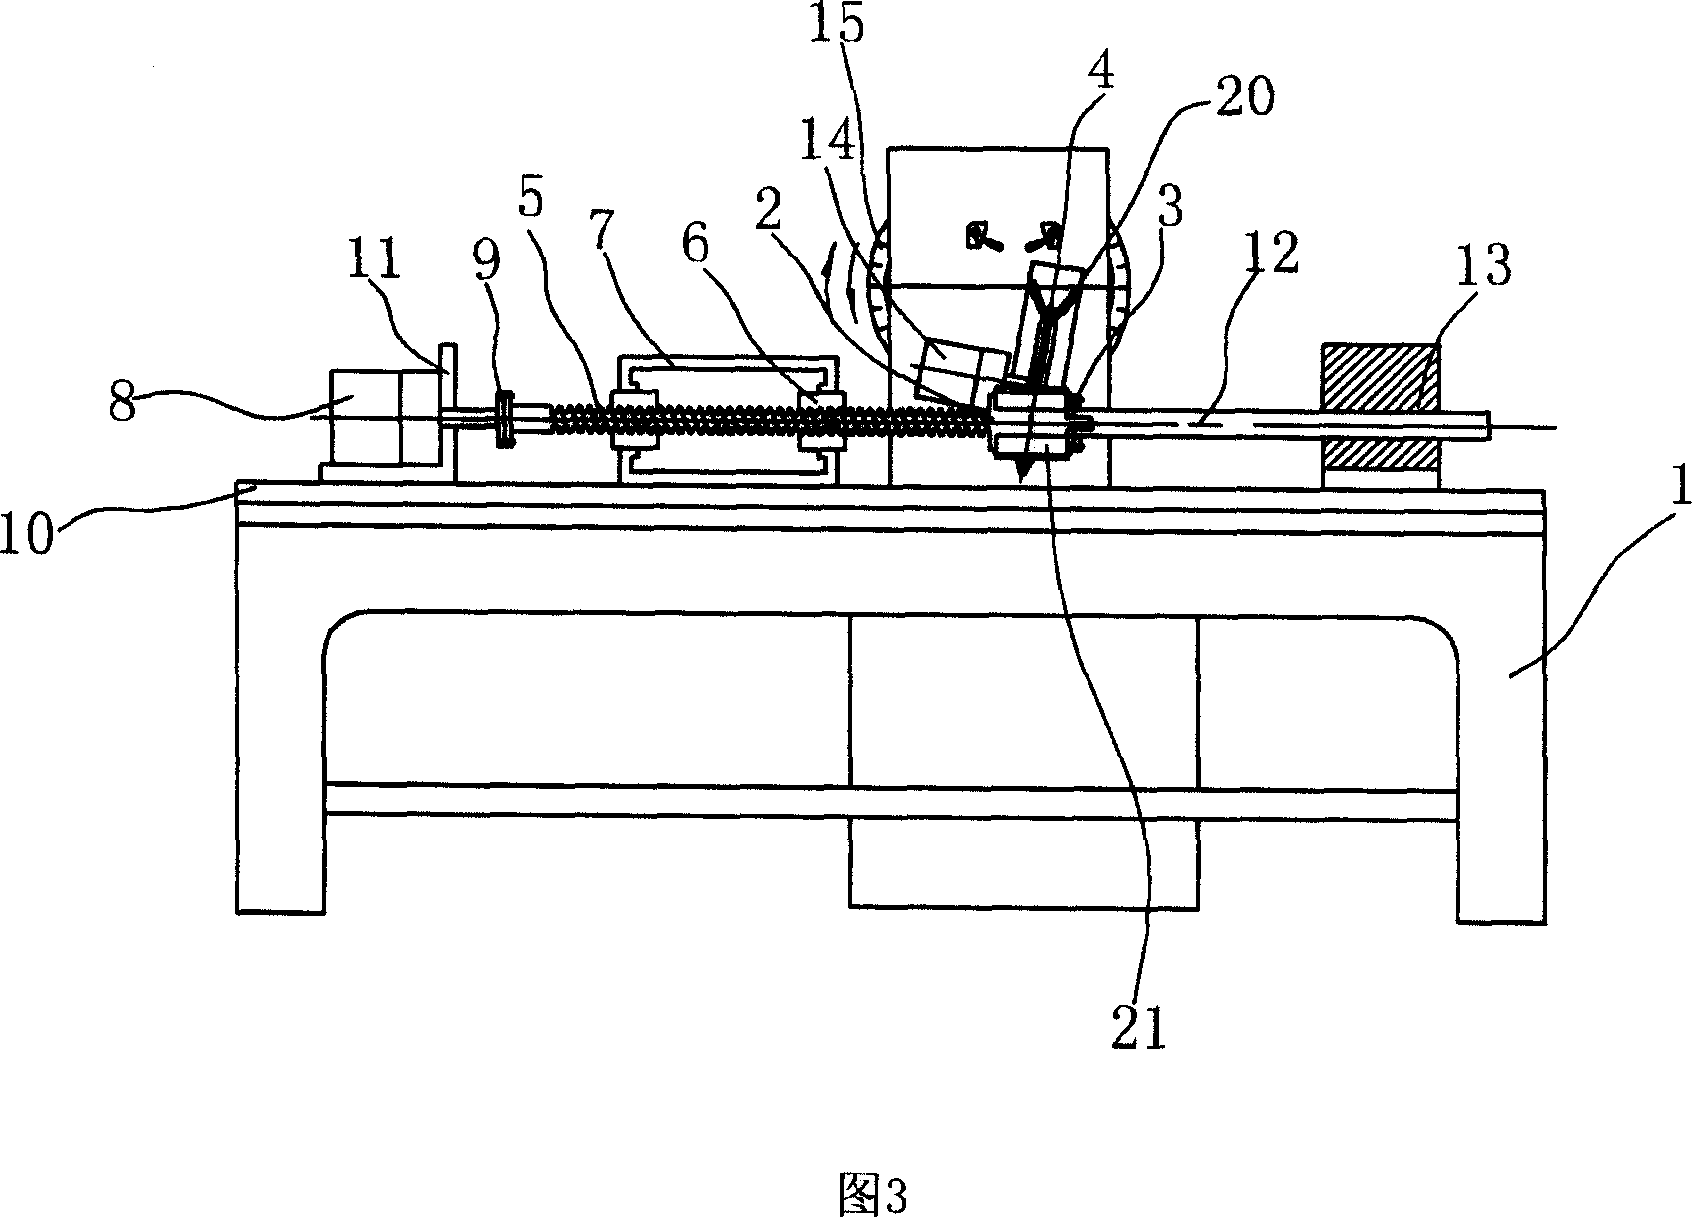 Worm and screw processing device